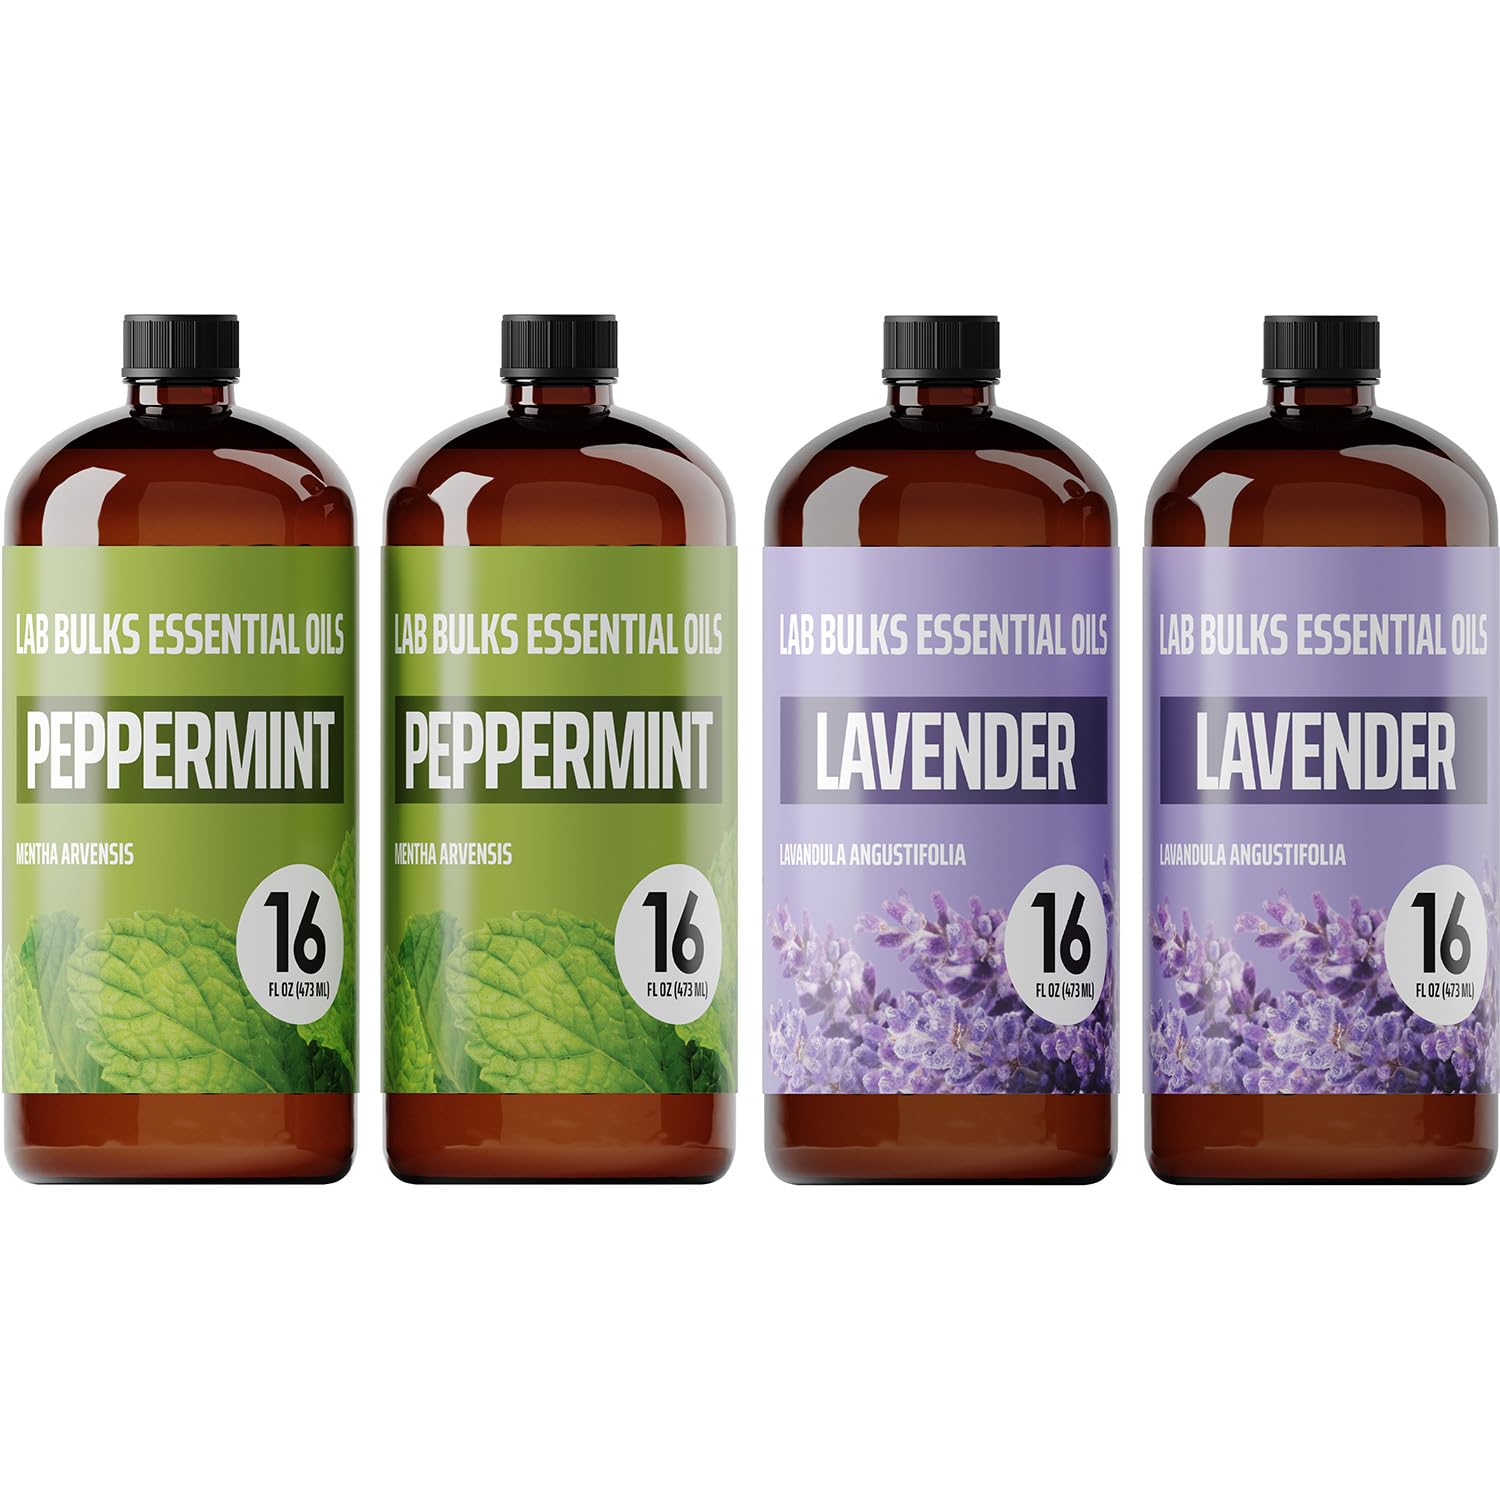 Bundle of Lab Bulks Peppermint and Lavender Essential Oils, 16 oz Bottles, for Diffusers, Home Care, Candles, Aromatherapy.